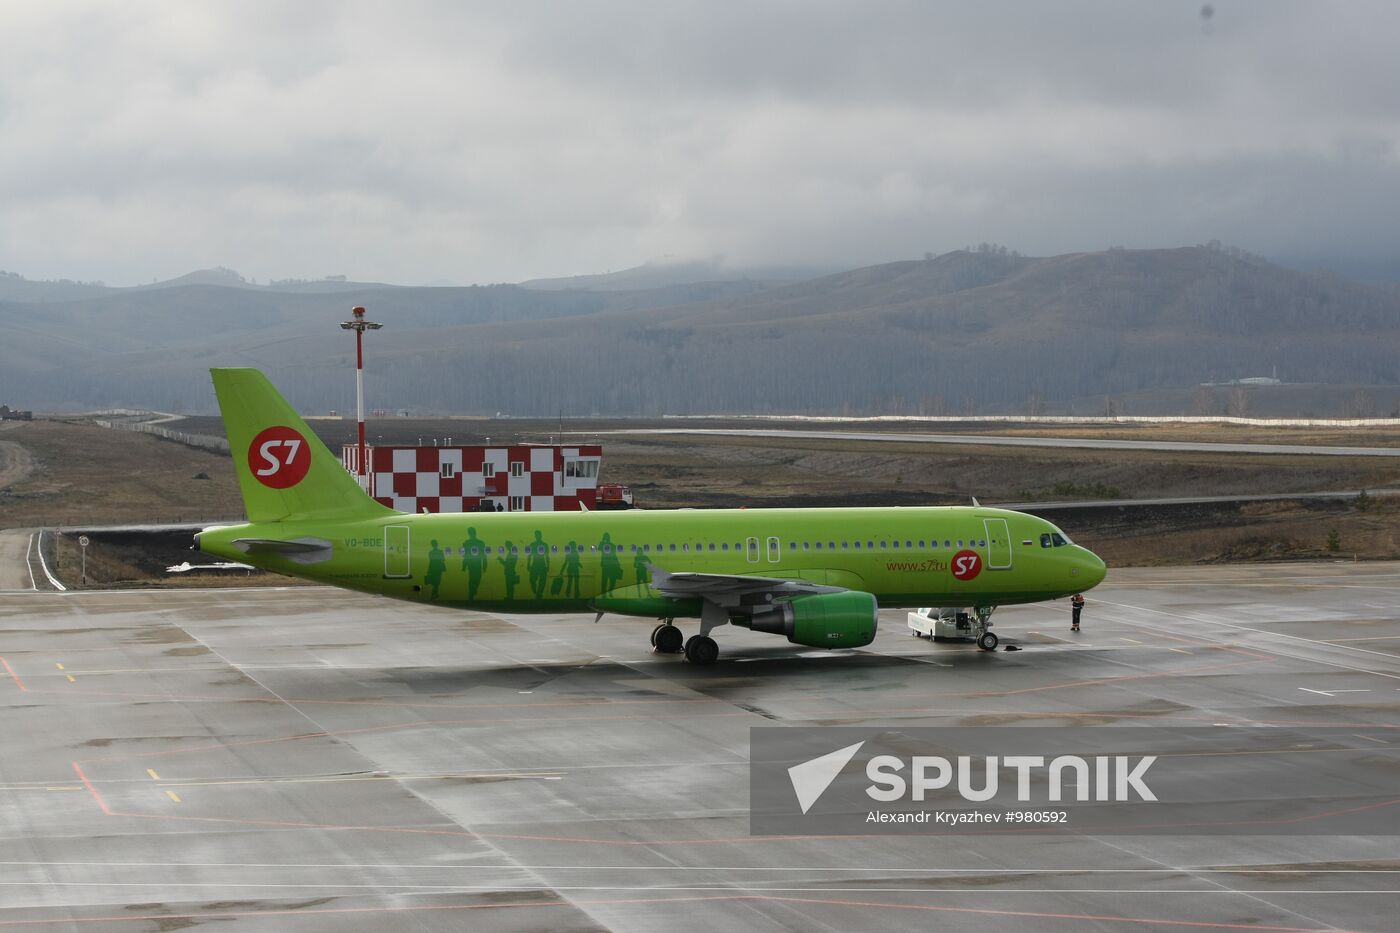 First Airbus A320 flight to Gorno-Altaisk Airport